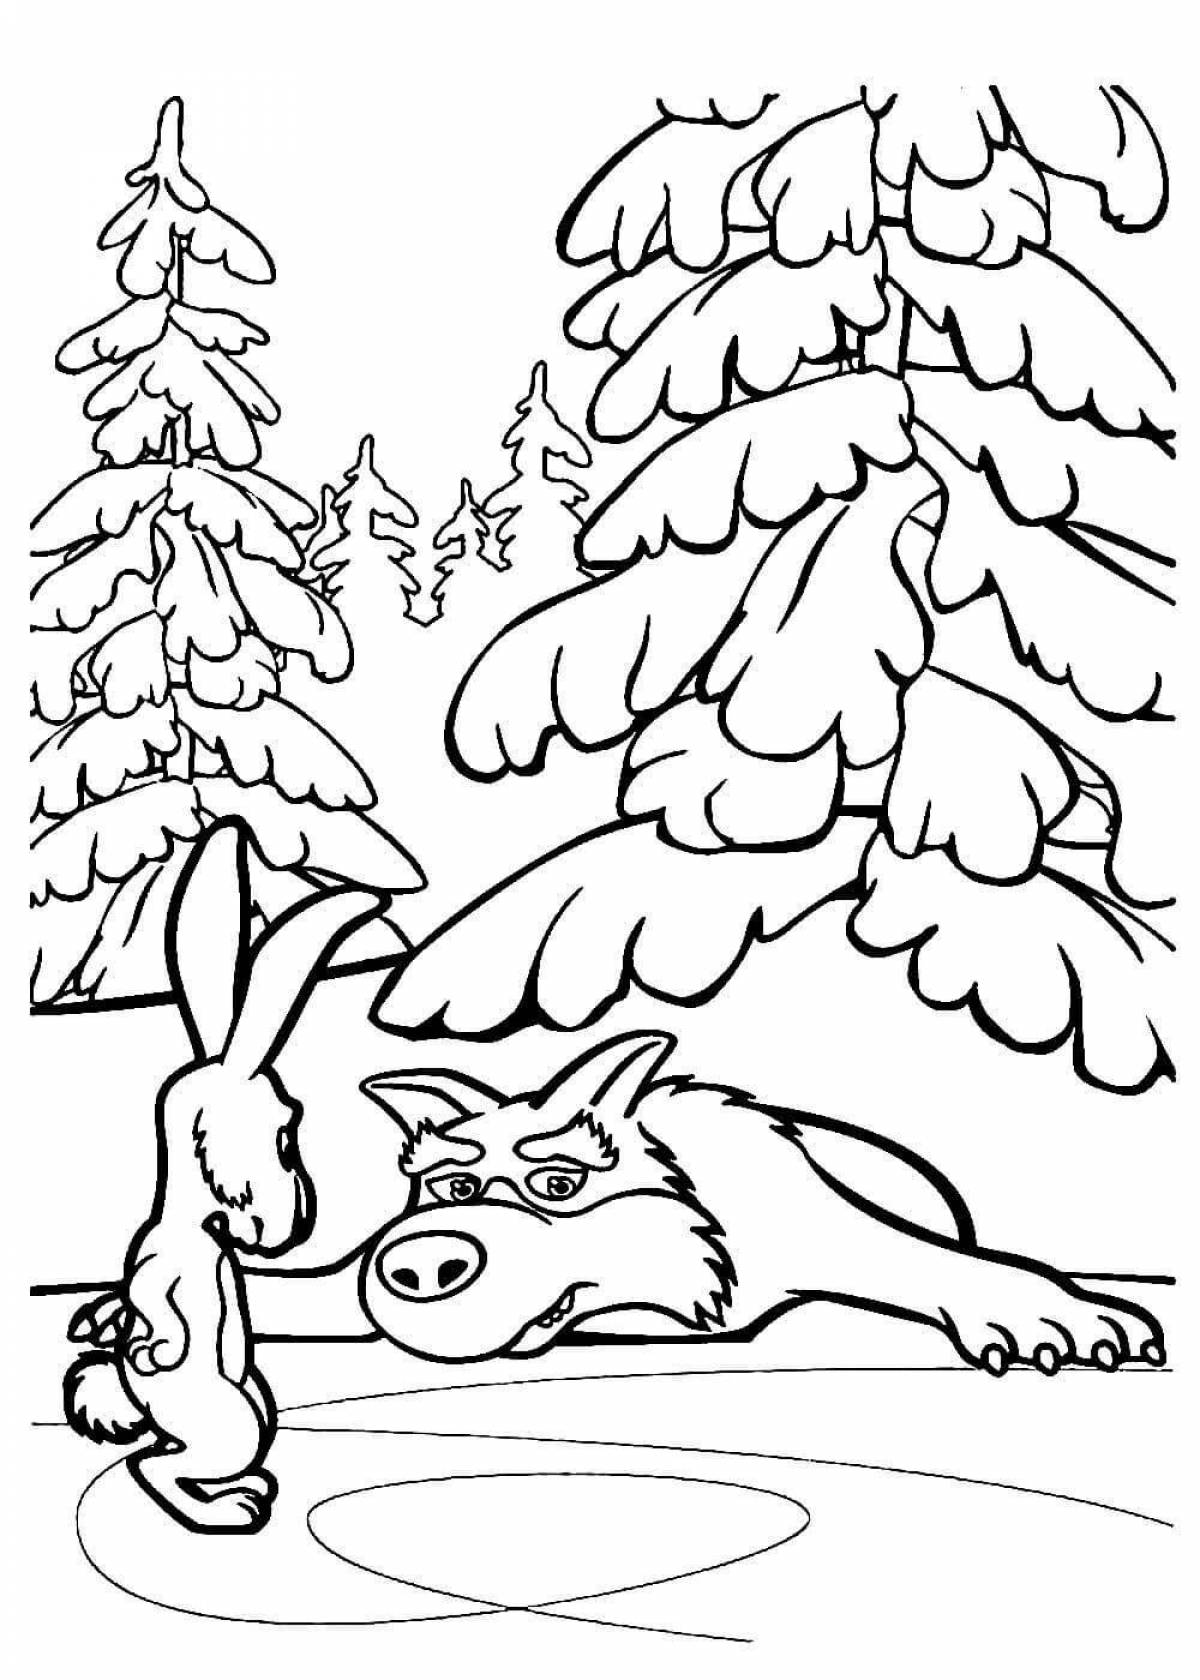 Wonderful winter in the forest coloring book